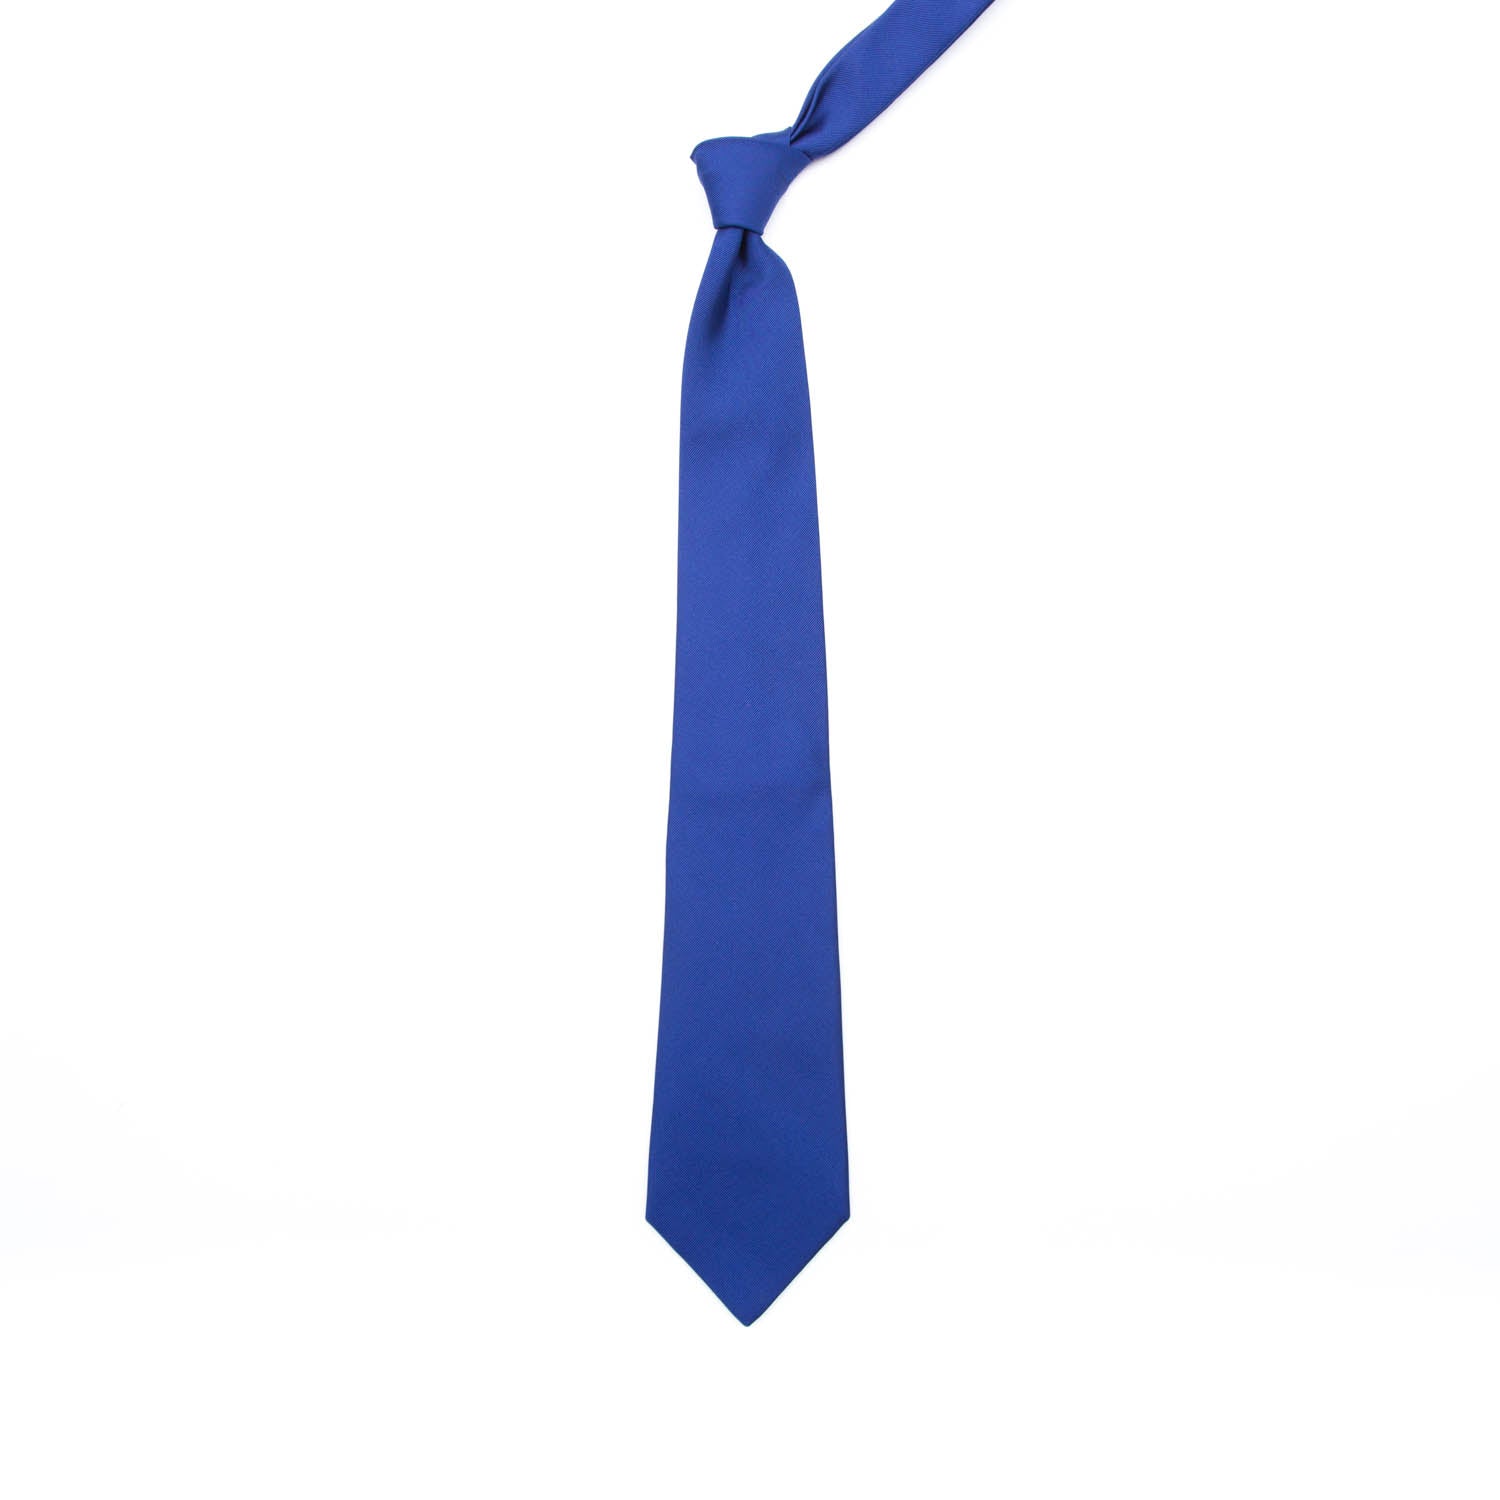 A Sovereign Grade Blue Satin Tie from KirbyAllison.com on a white background.